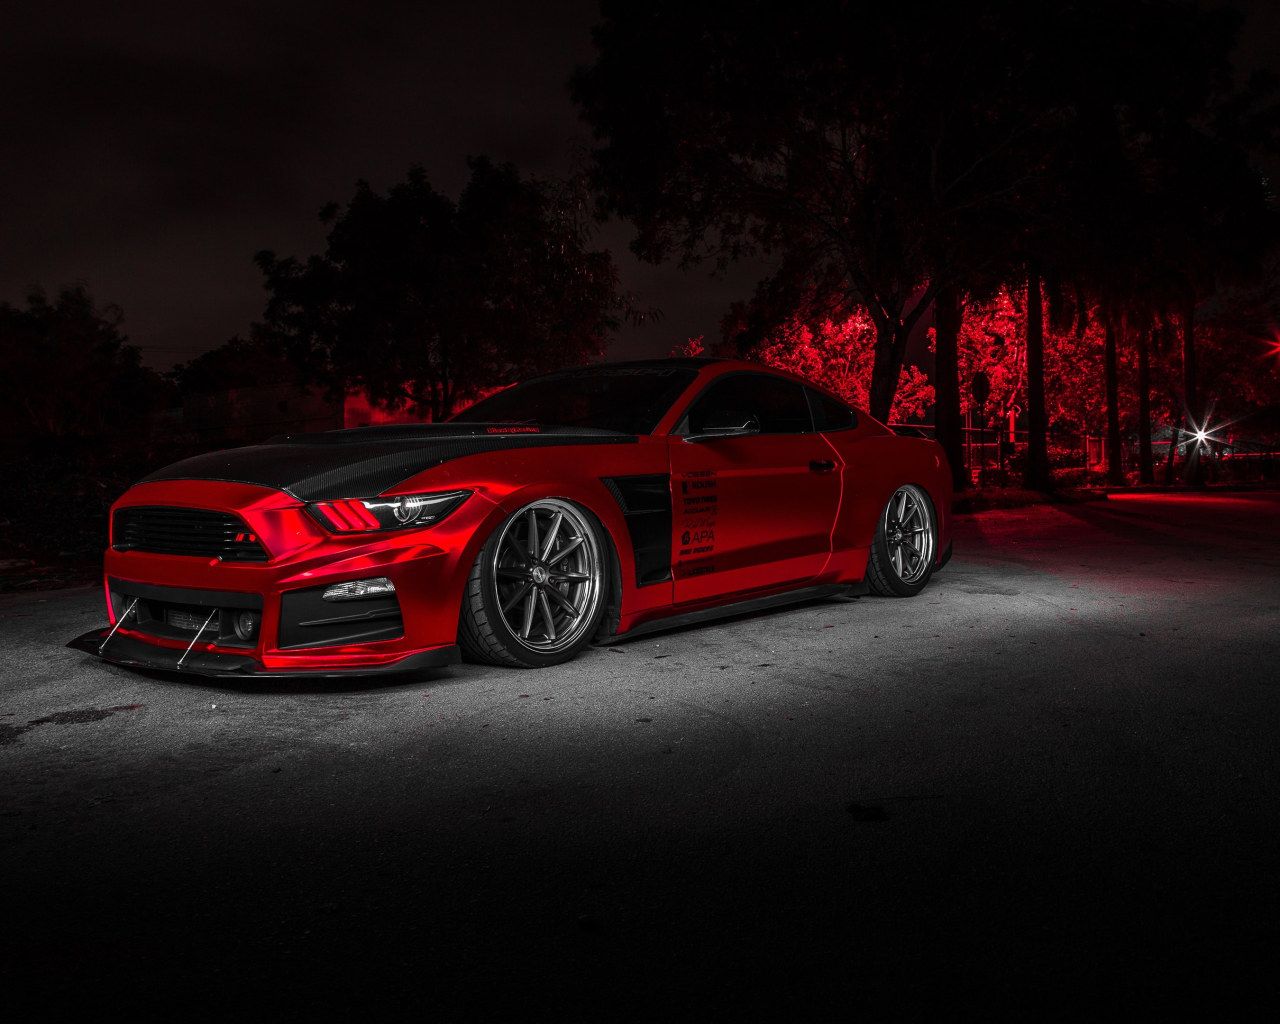 Cars & Motos Wallpaper • Wallpaper Red car, design, ford mustang, automotive design, vehicle, sports car • Wallpaper For You The Best Wallpaper For Desktop & Mobile